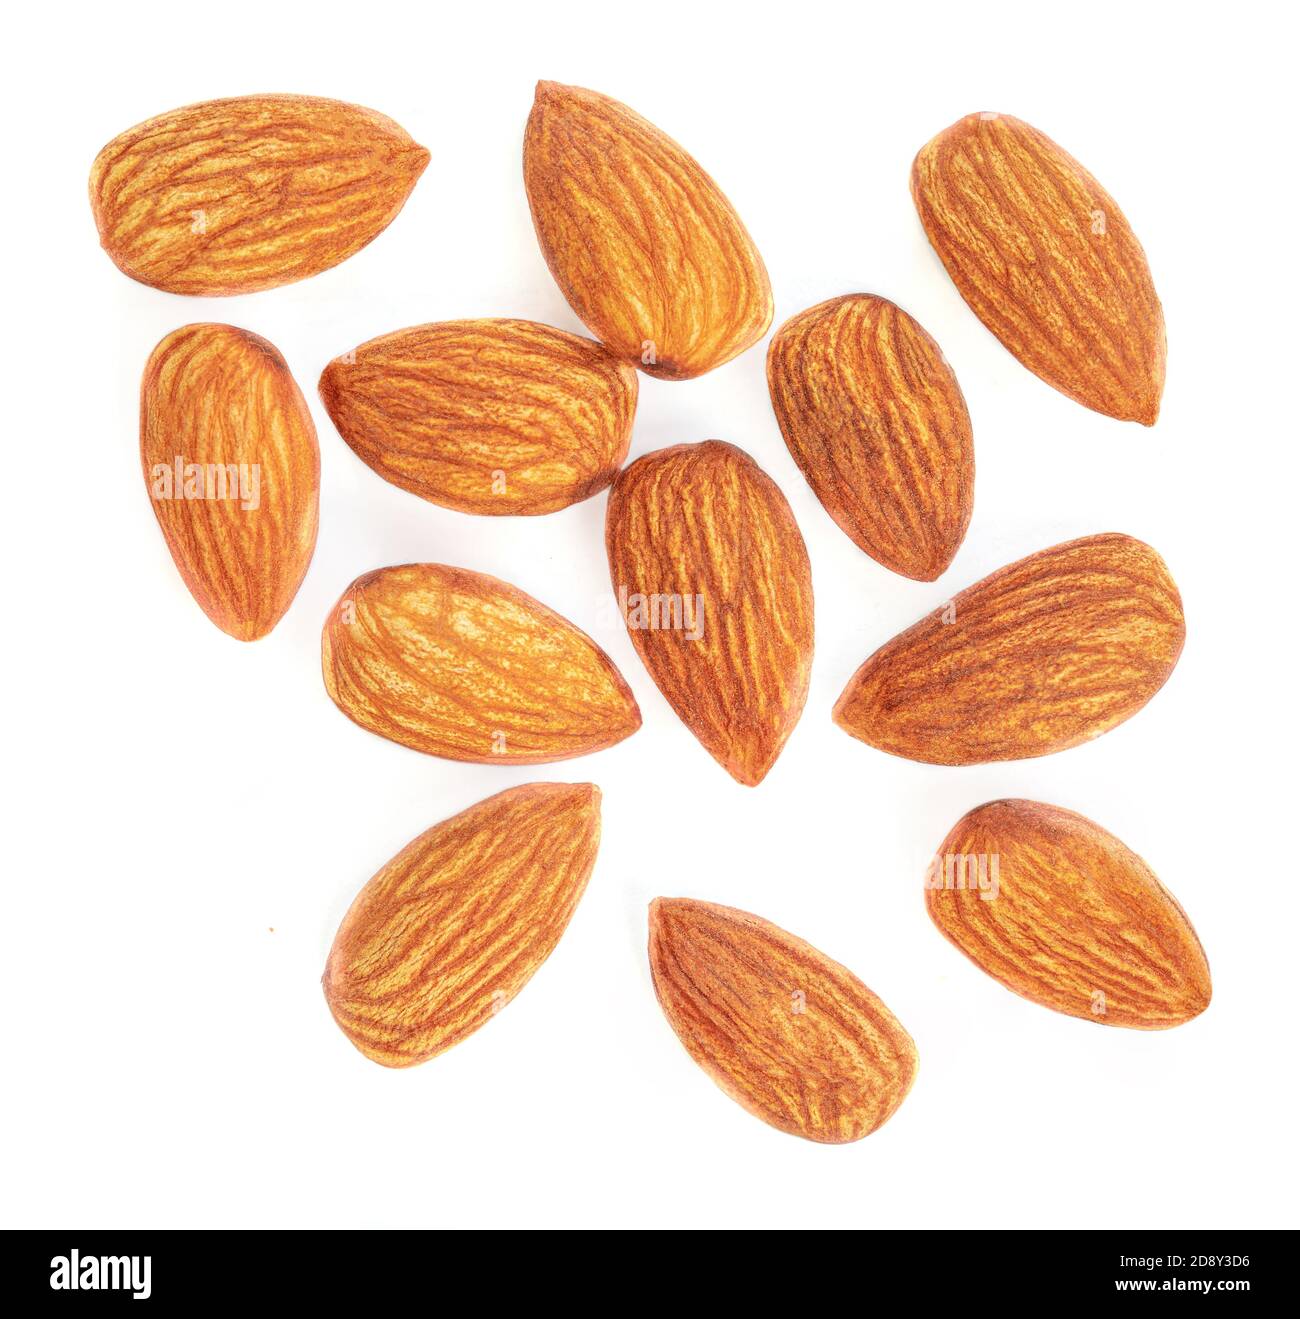 Almond nuts Isolated on white background. Pile of Almonds  Top view. Food Creative layout Stock Photo